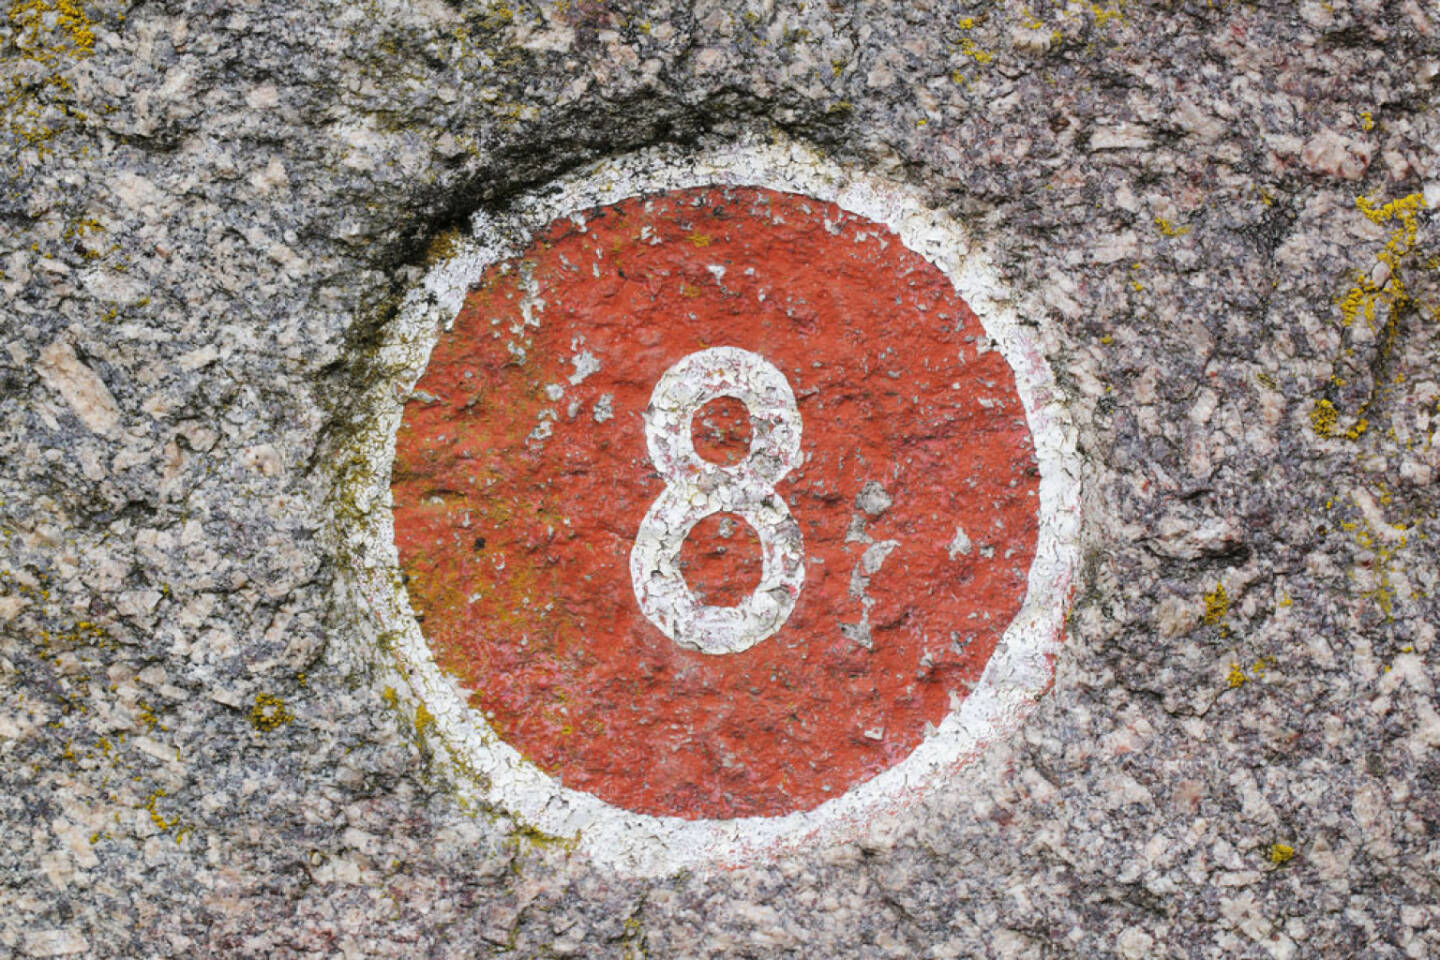 8, Acht, http://www.shutterstock.com/de/pic-61235590/stock-photo-number-painted-inside-a-red-circle.html 